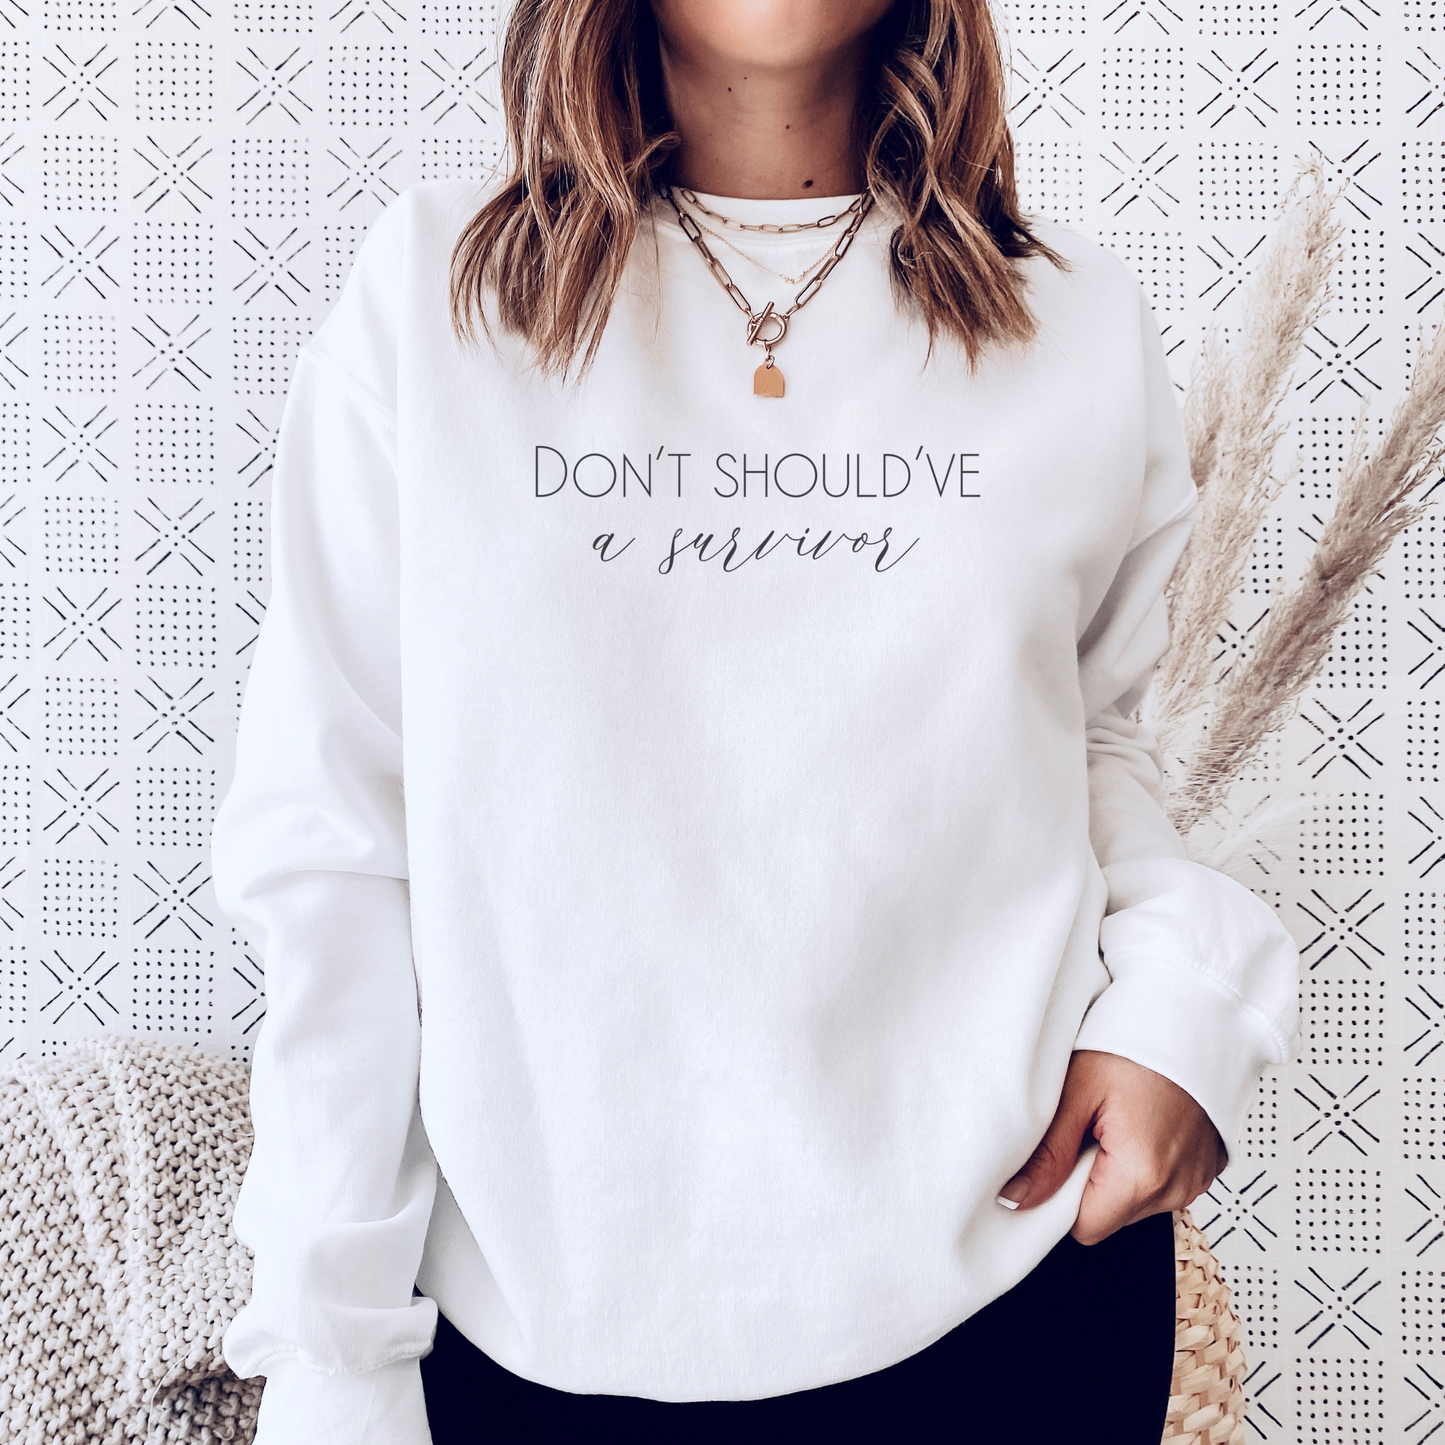 The bold and impactful slogan, "Don't Should've A Survivor," sends a clear message against the harmful practice of victim blaming. By wearing this shirt, you become an advocate for change, contributing to a culture of empathy, understanding, and respect. Perfect for survivors of abuse and trauma, victim advocates, and mental health advocates.